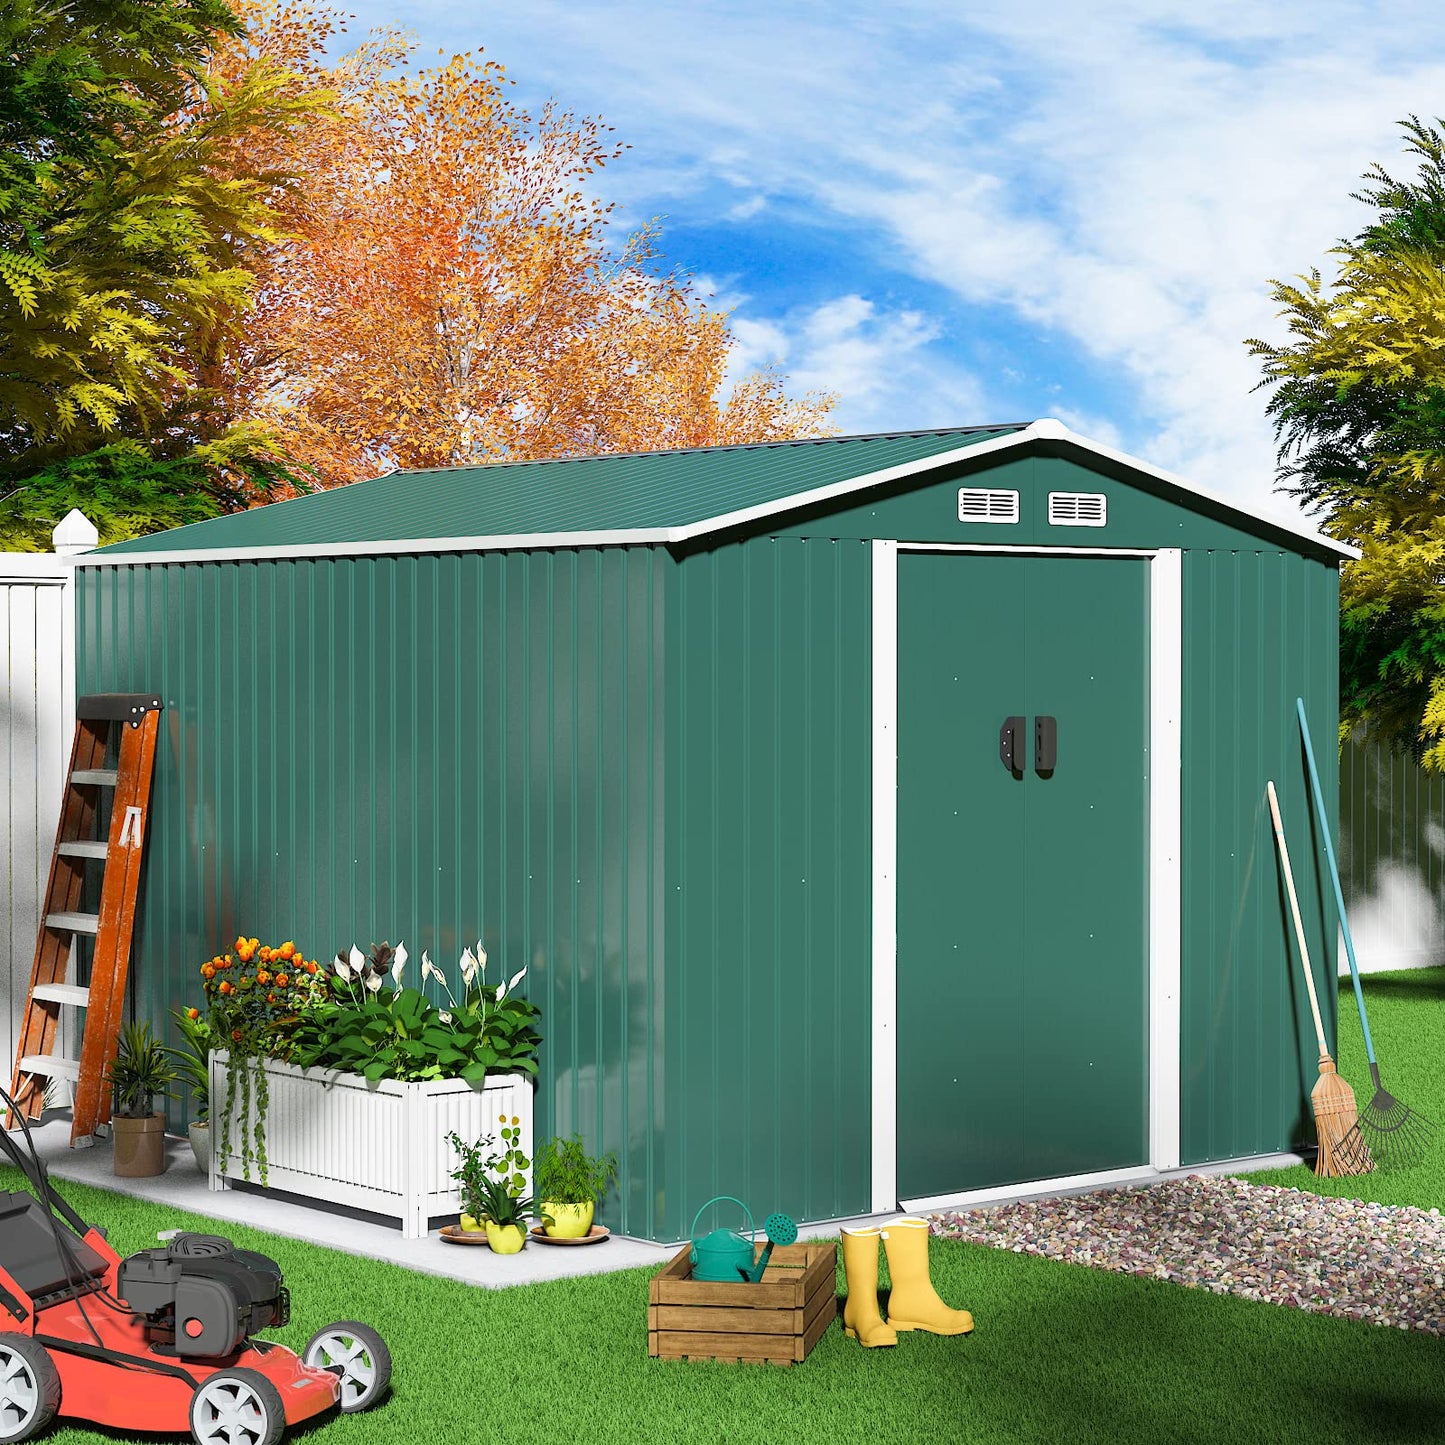 HOGYME 10.5' x 9.1' Storage Shed Large Metal Shed, Sheds &Outdoor Storage Clearance Suitable for Garden Tool Bike Lawn Mower Ladder, Utility Tool House w/ Lockable/Sliding Door, 4 Vents, Green